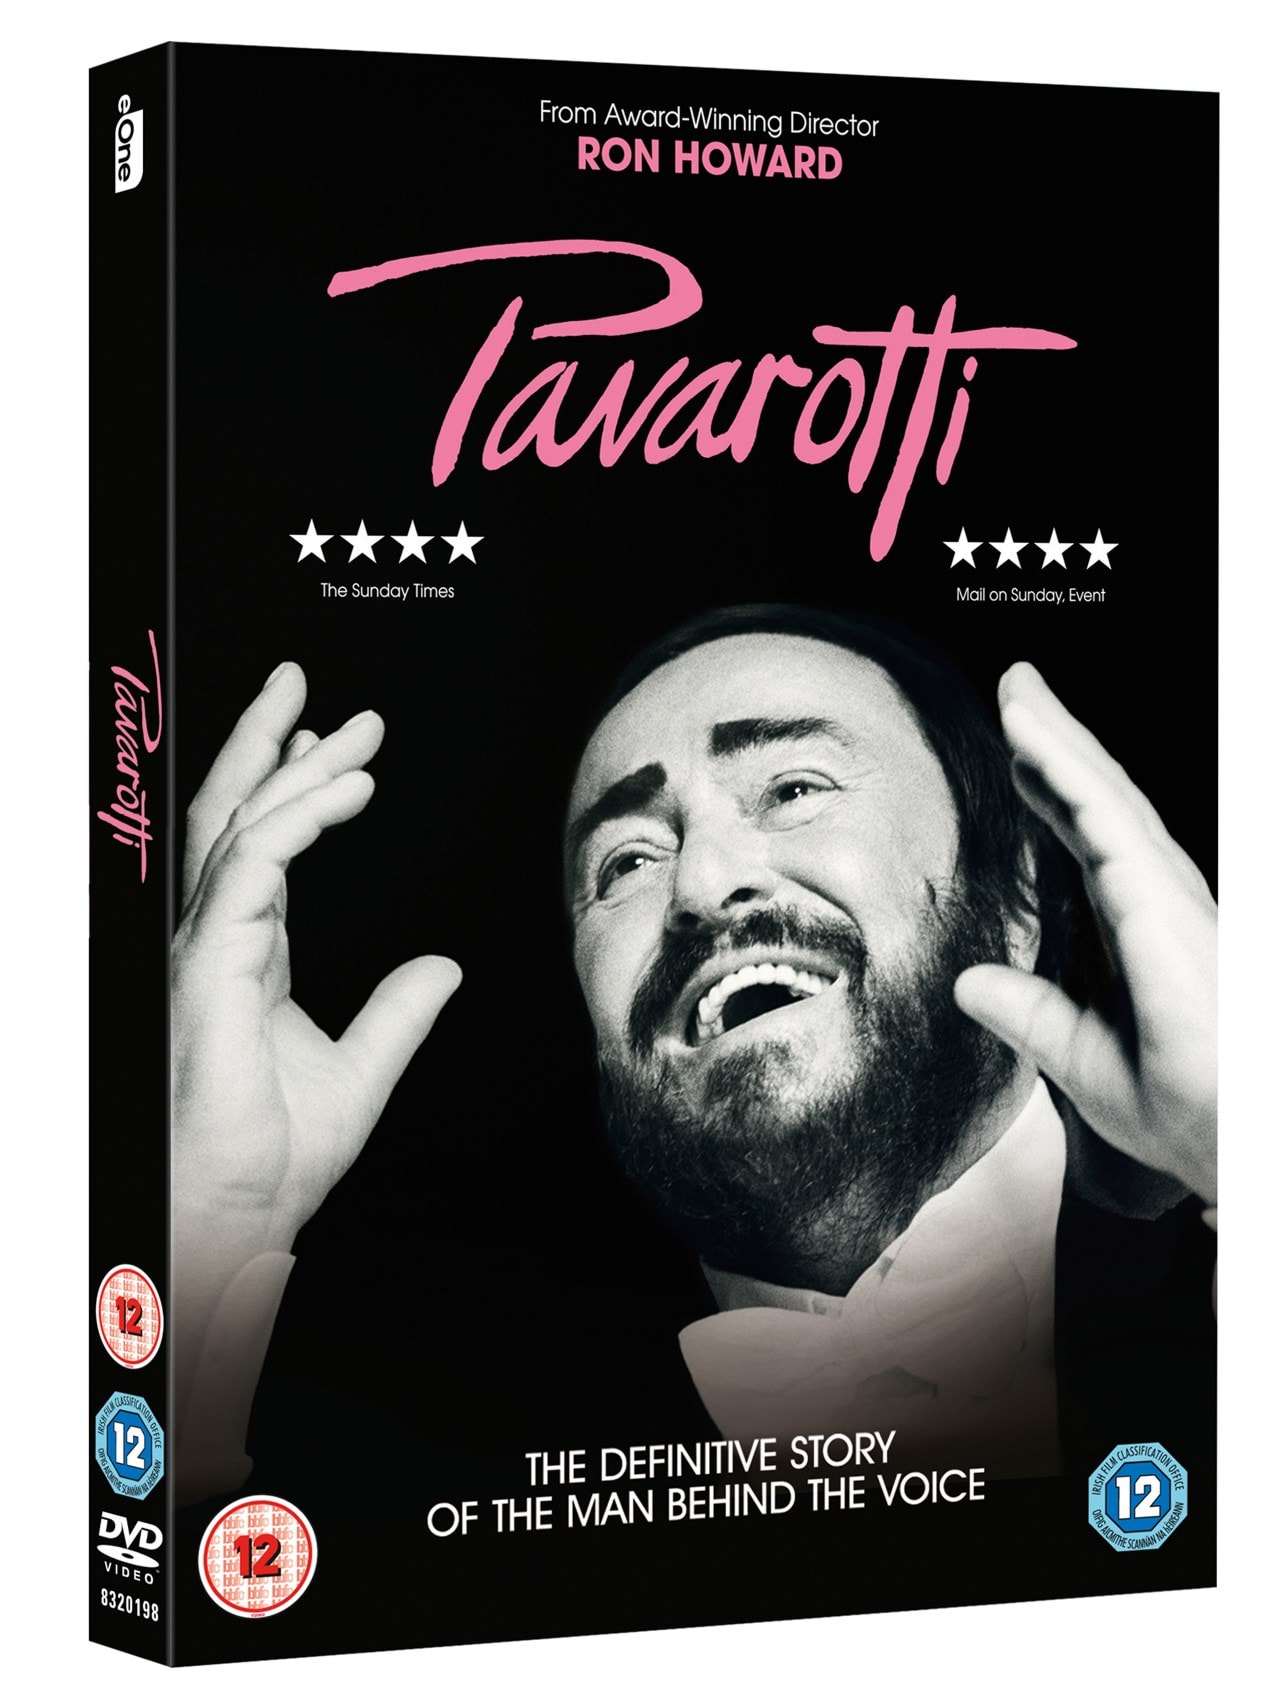 Pavarotti and friends dvd download torrent